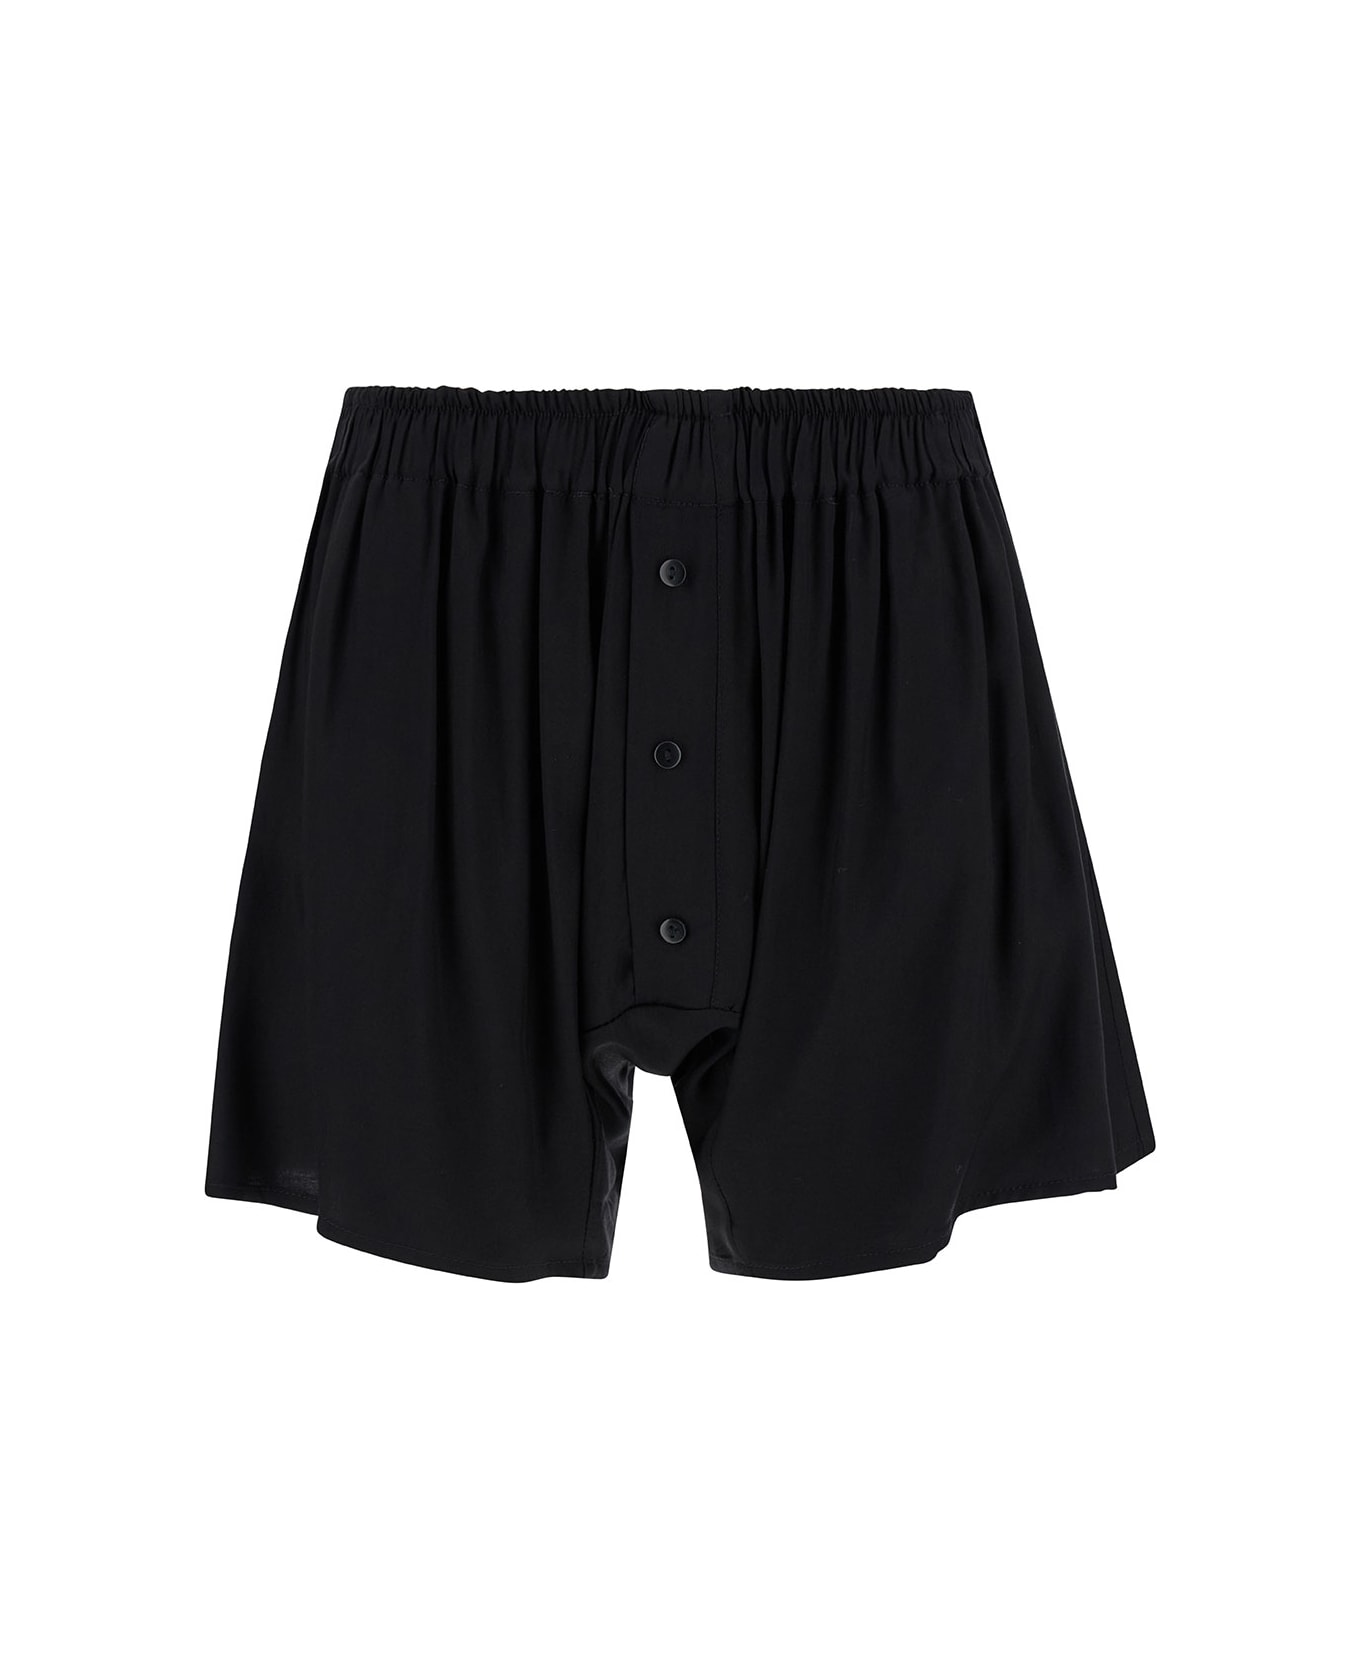 Federica Tosi Black Bermuda Shorts With Buttons In Viscose Woman - BLACK